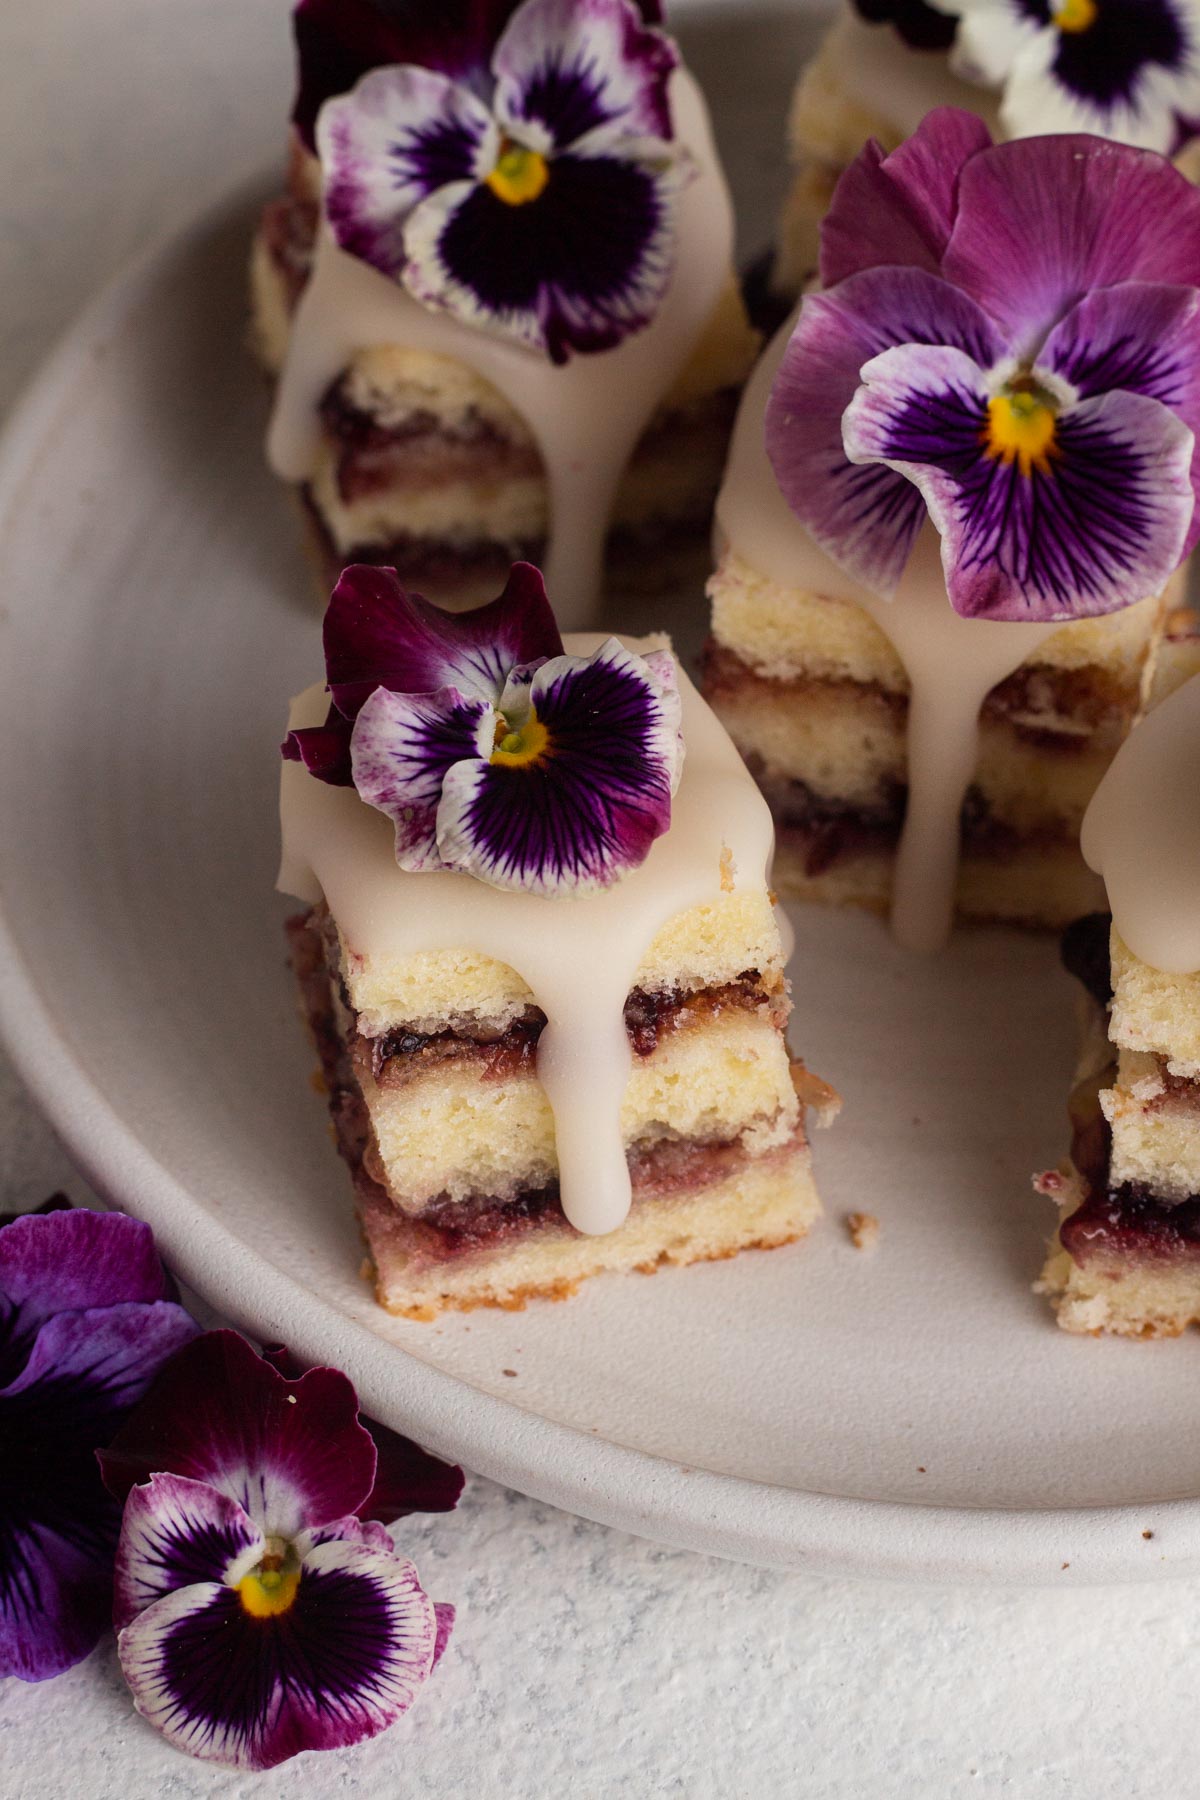 Angled view of plate of glazed petit fours topped with pansy flowers.